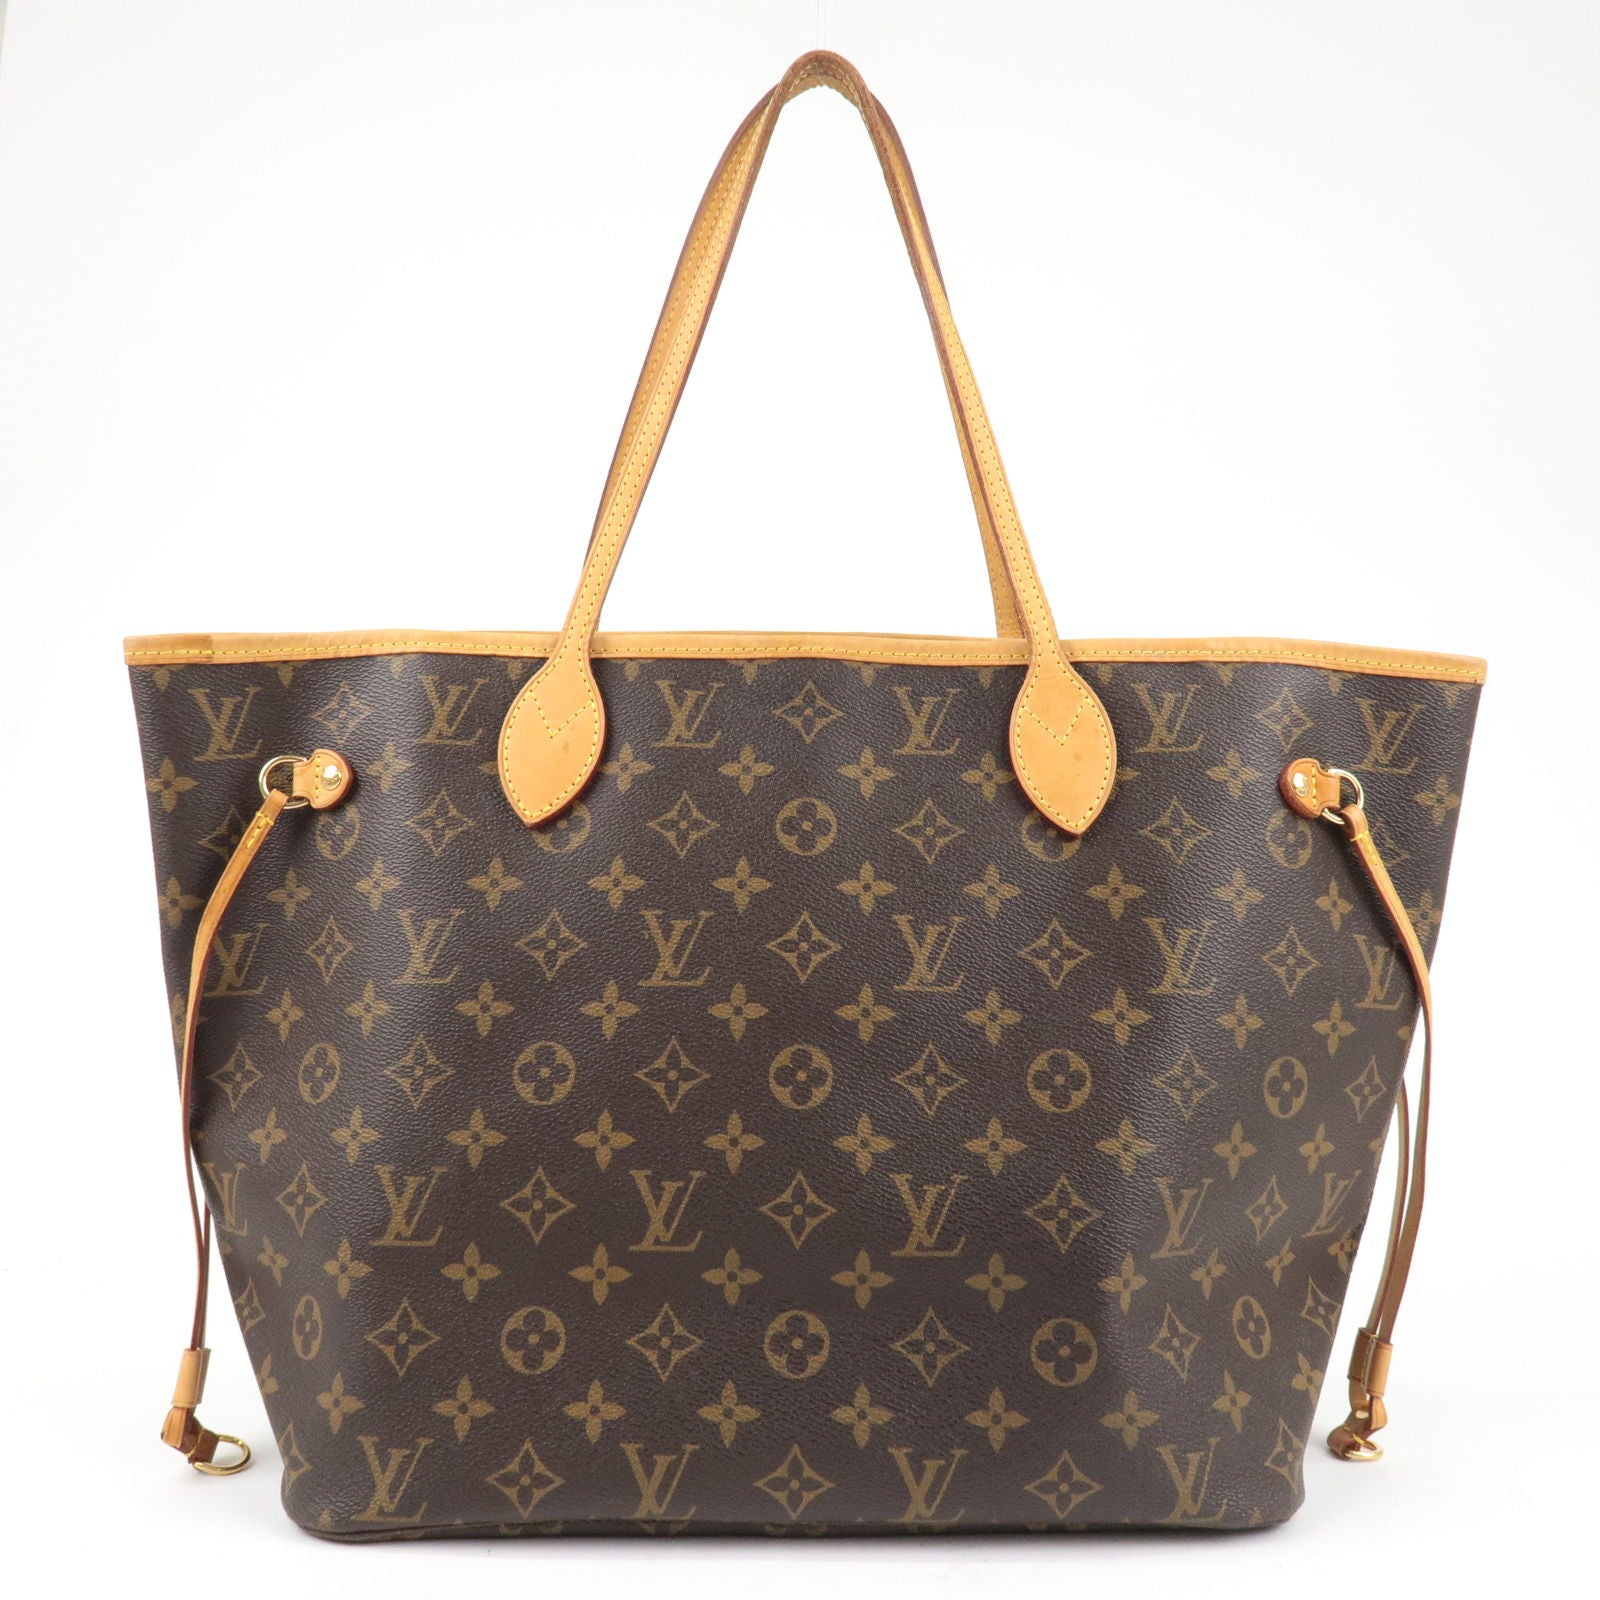 Never full mm price comparison between India and rotw : r/Louisvuitton